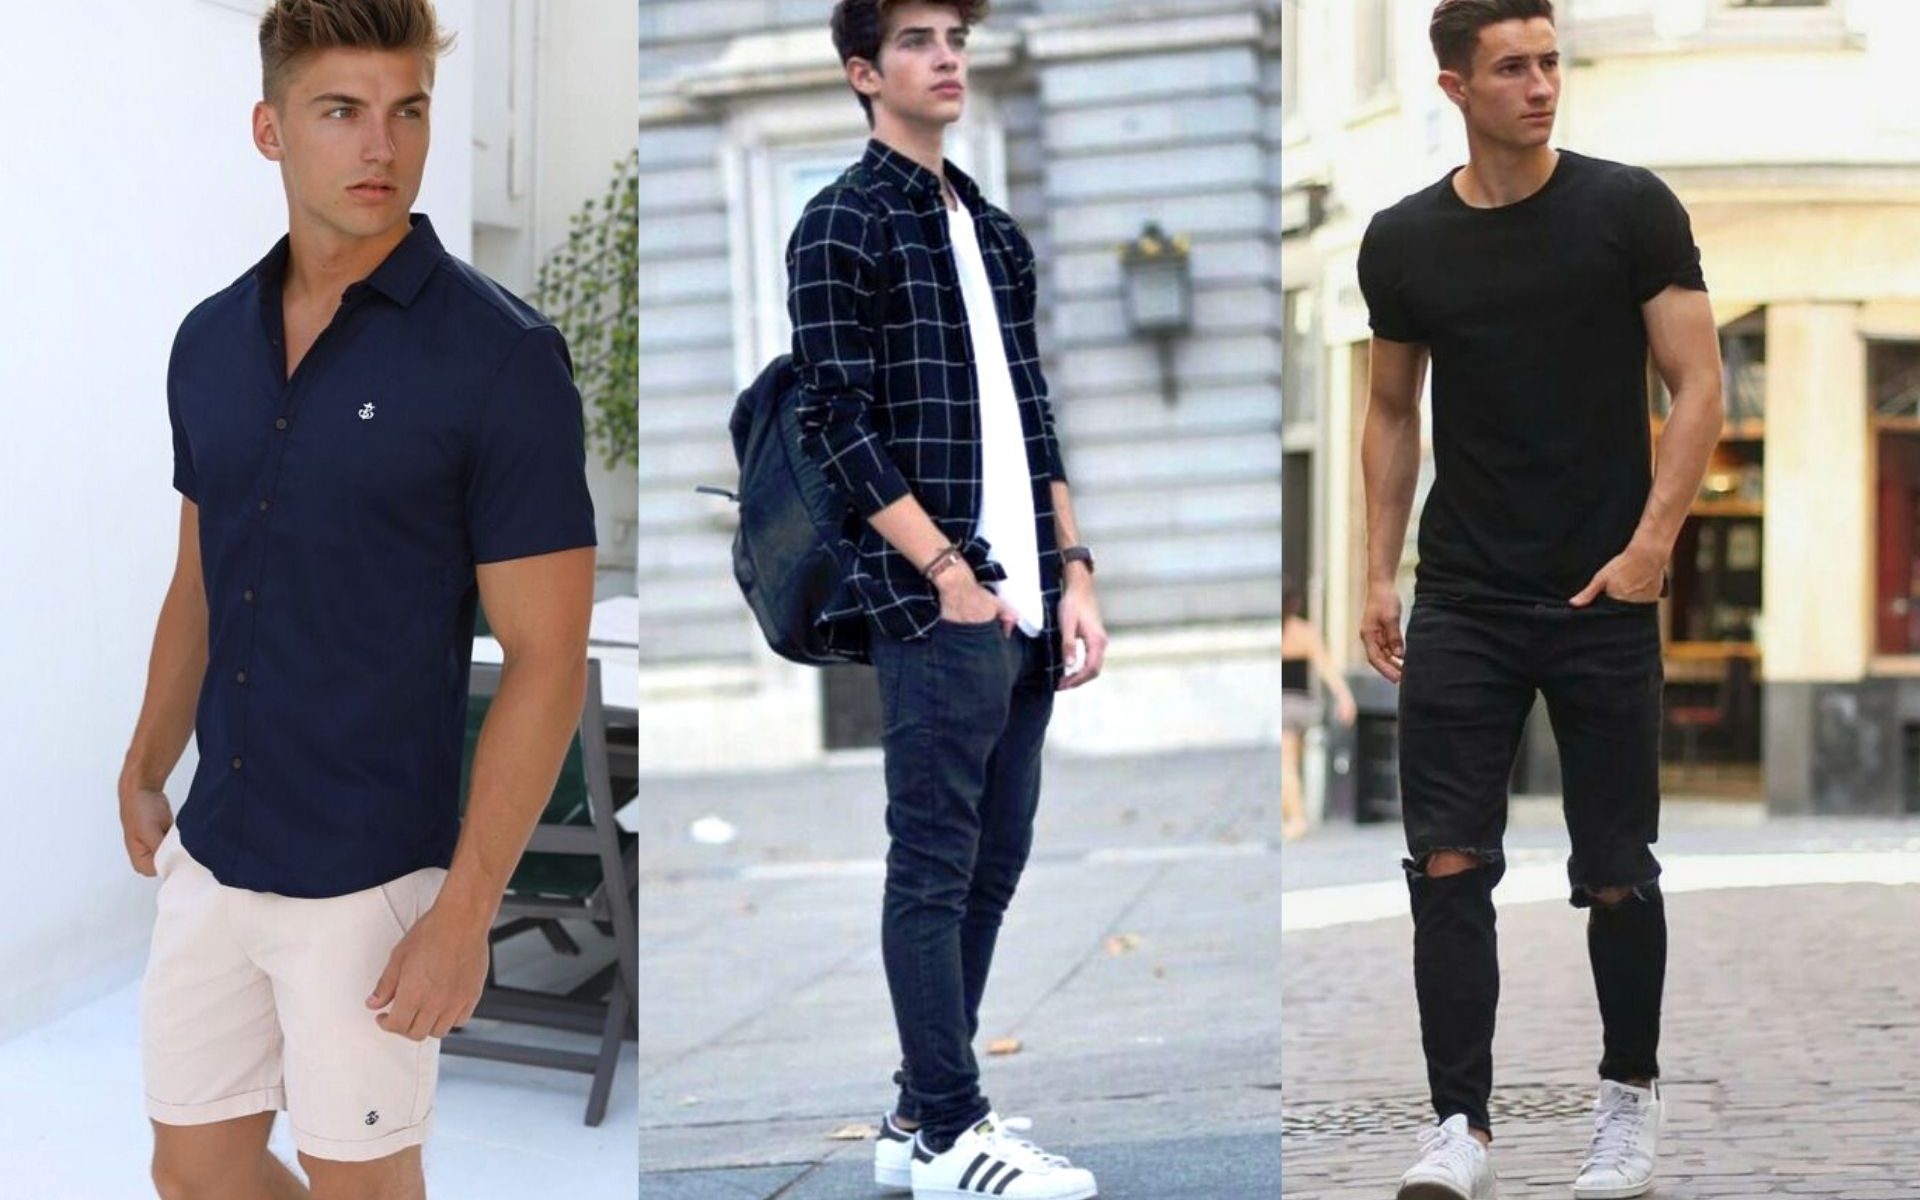 outfit ideas for boys